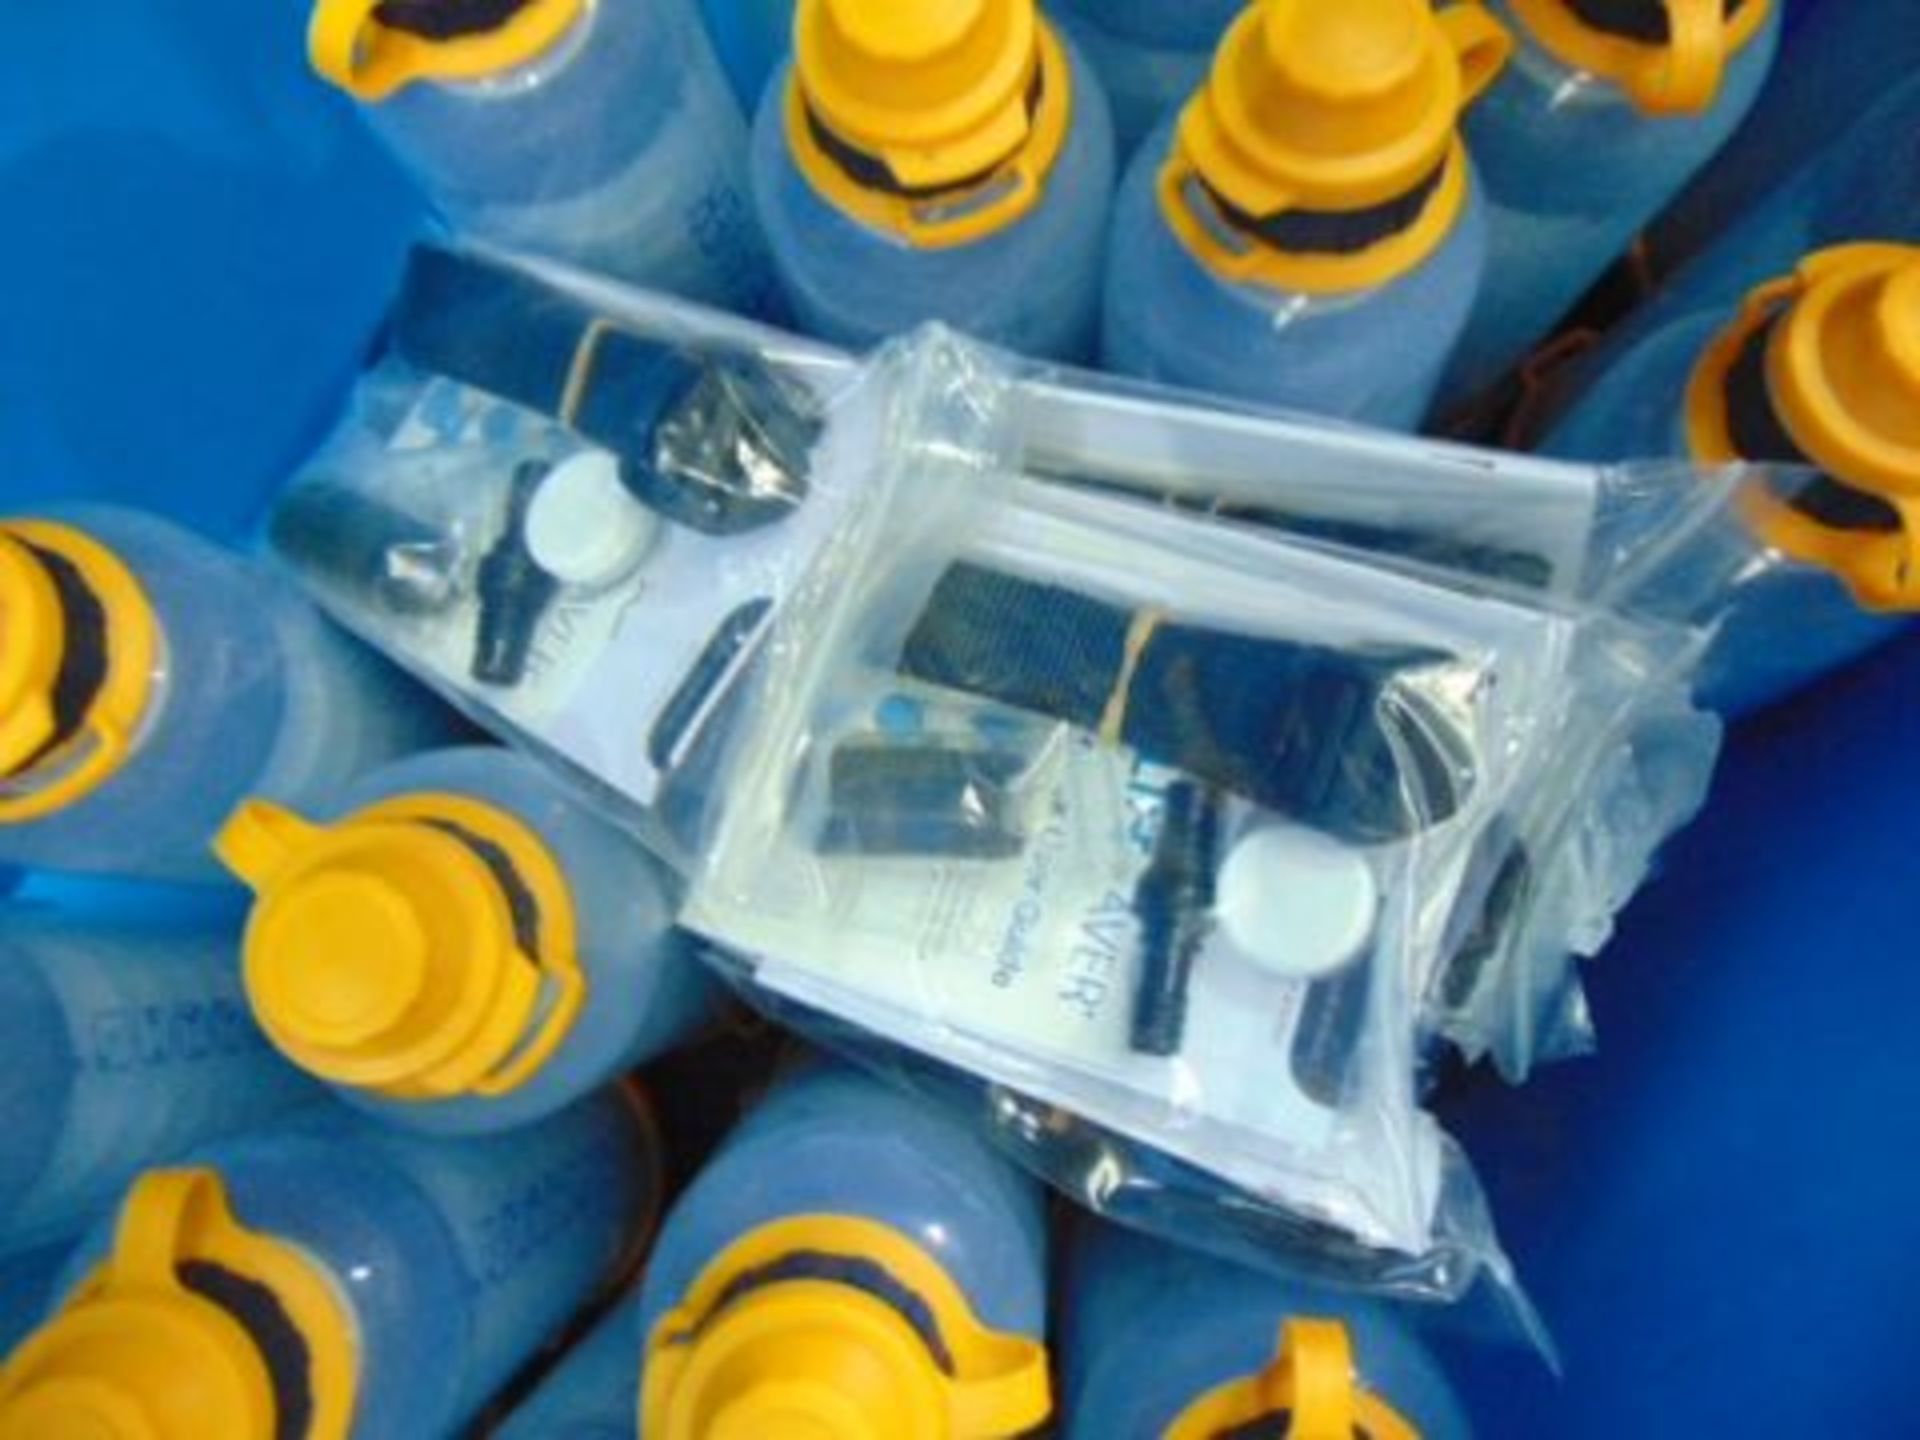 24 x Unissued Lifesaver 400UF ultra filtration water bottles, with storage box - Image 2 of 7